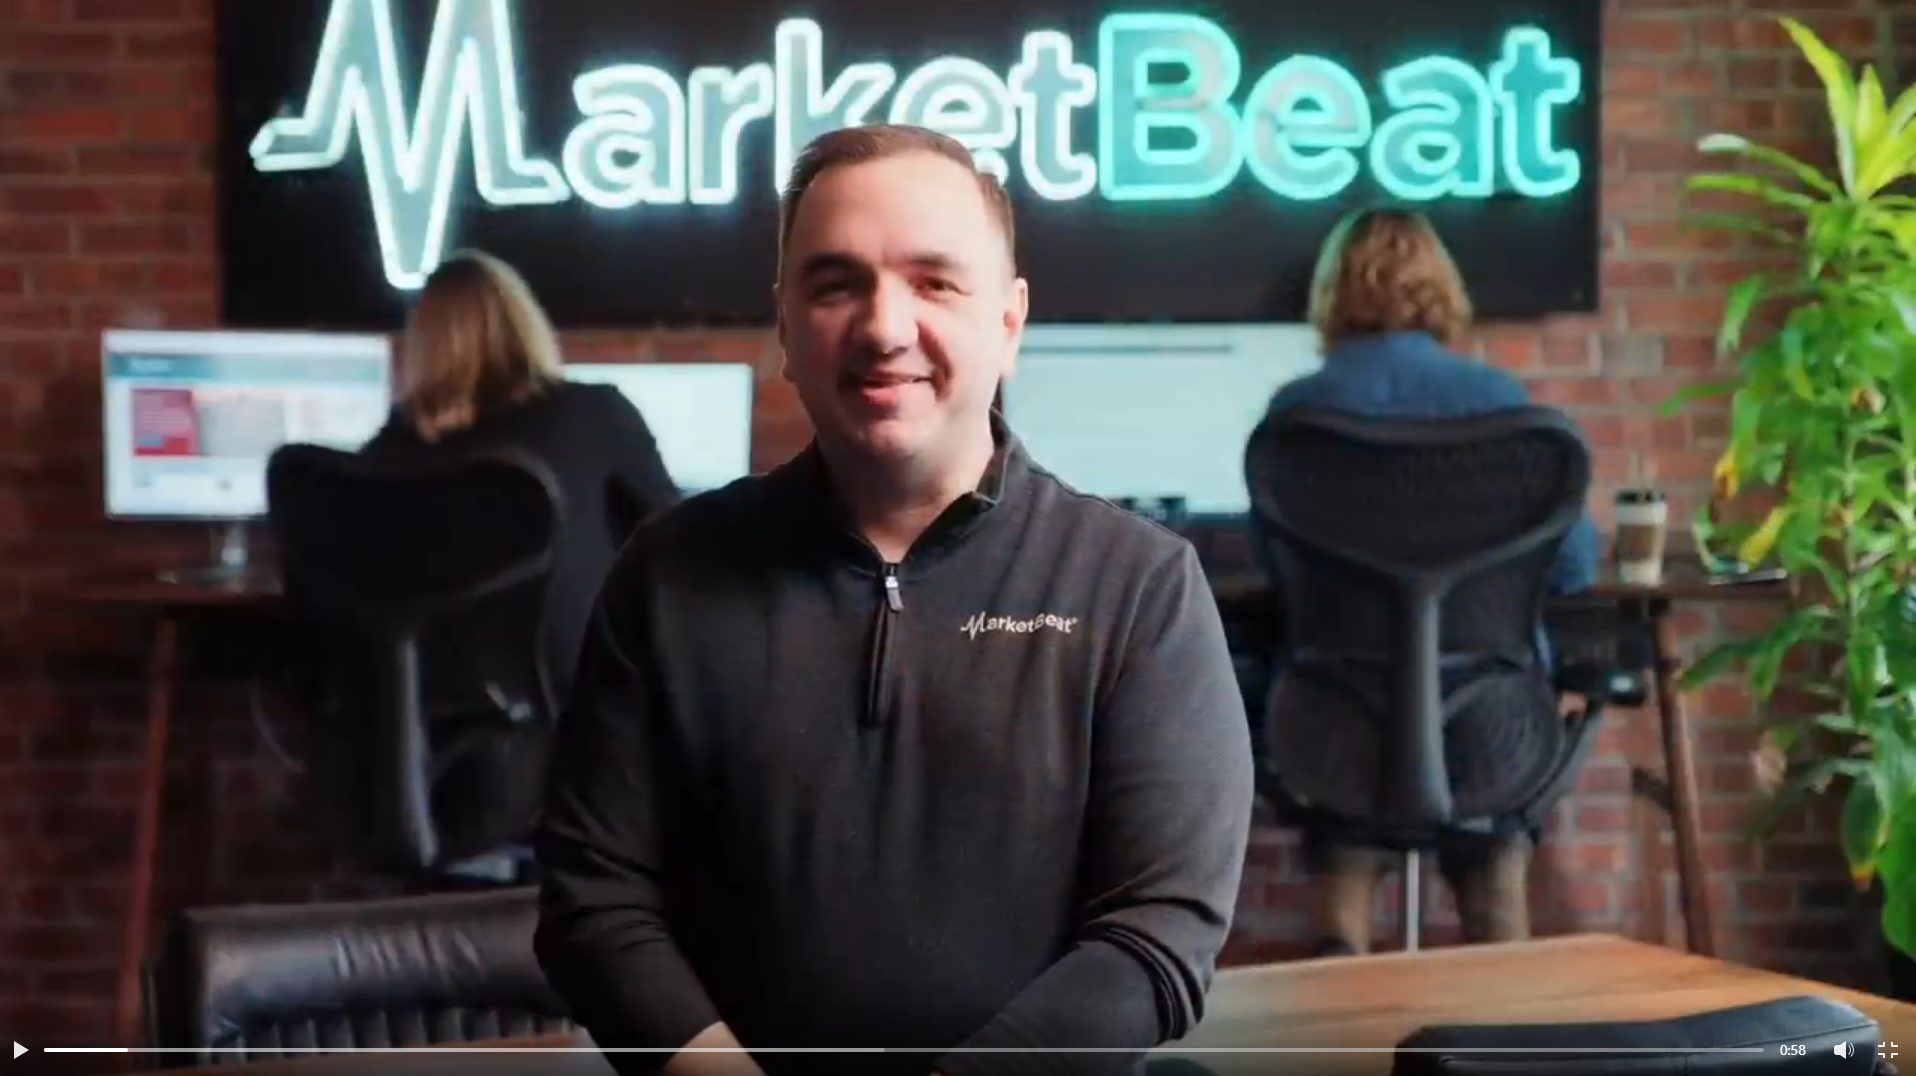 MarketBeat 60 Second Commercial